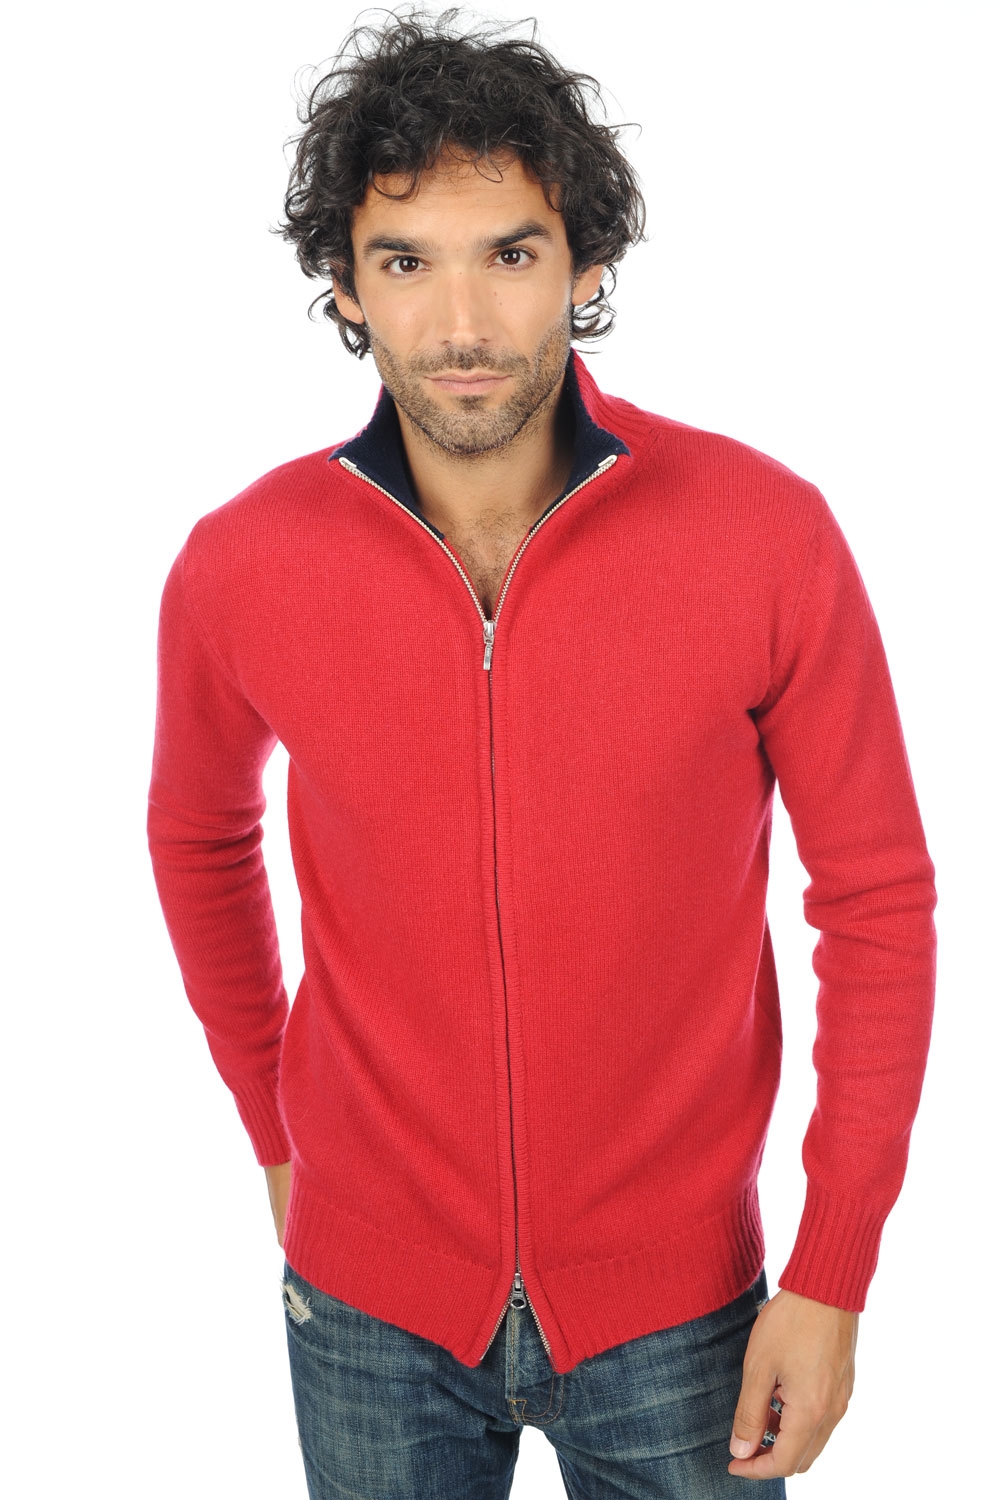 Cachemire pull homme maxime rouge velours marine fonce l